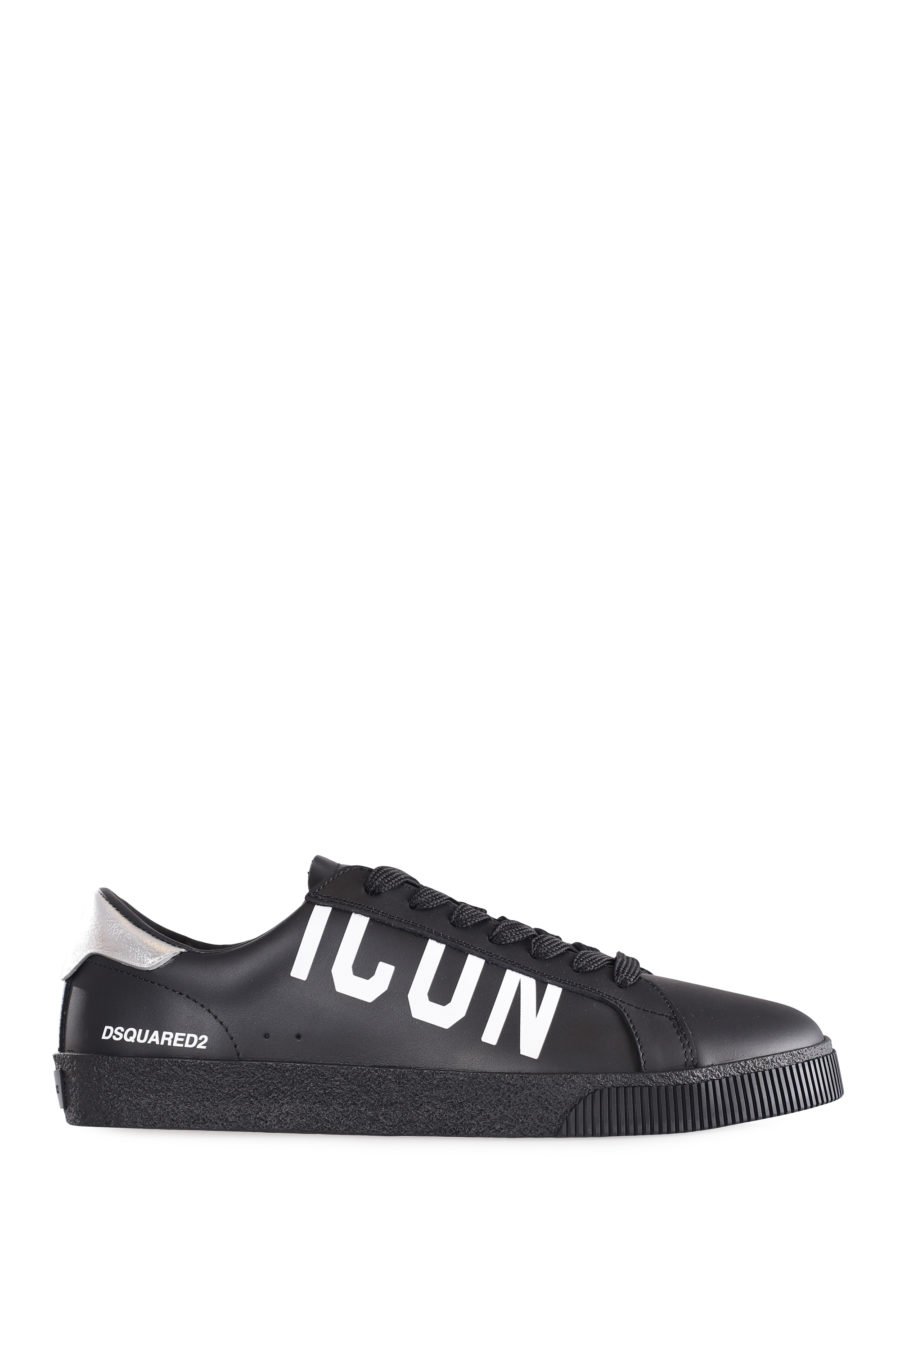 Black trainers with diagonal "icon" logo and silver detail - IMG 9562